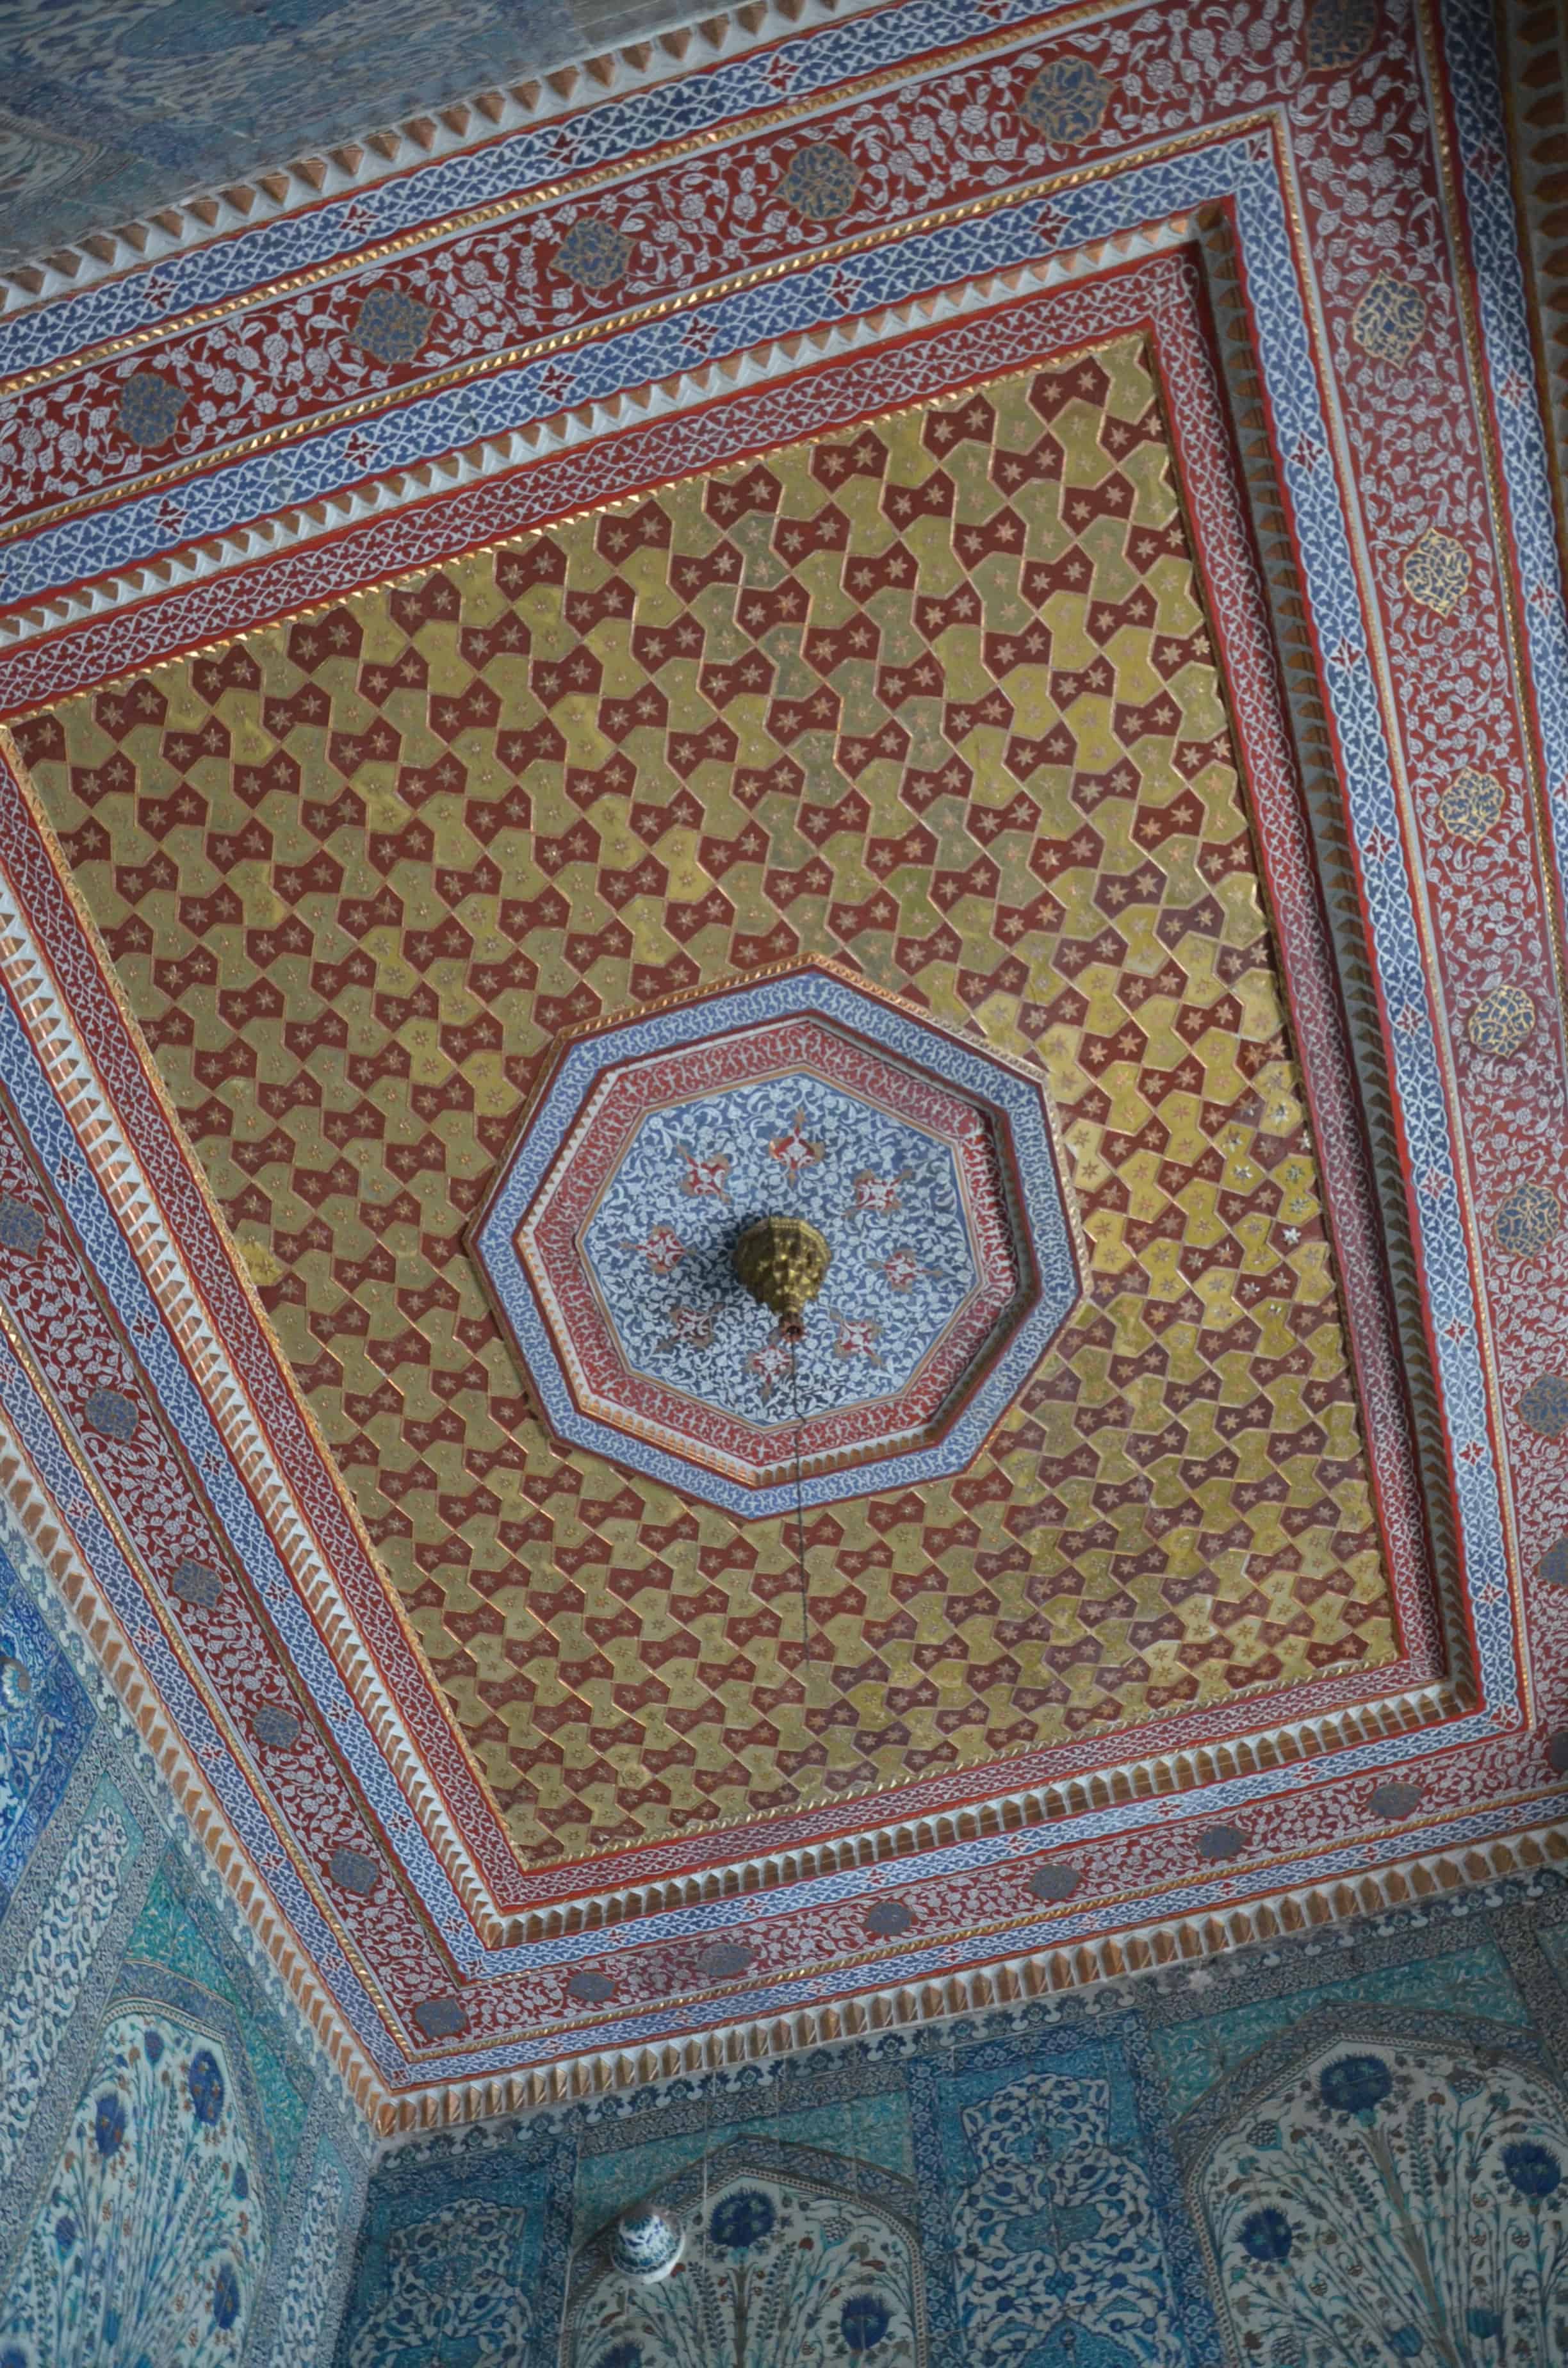 Flat wooden ceiling in the Twin Kiosk in the Imperial Harem at Topkapi Palace in Istanbul, Turkey